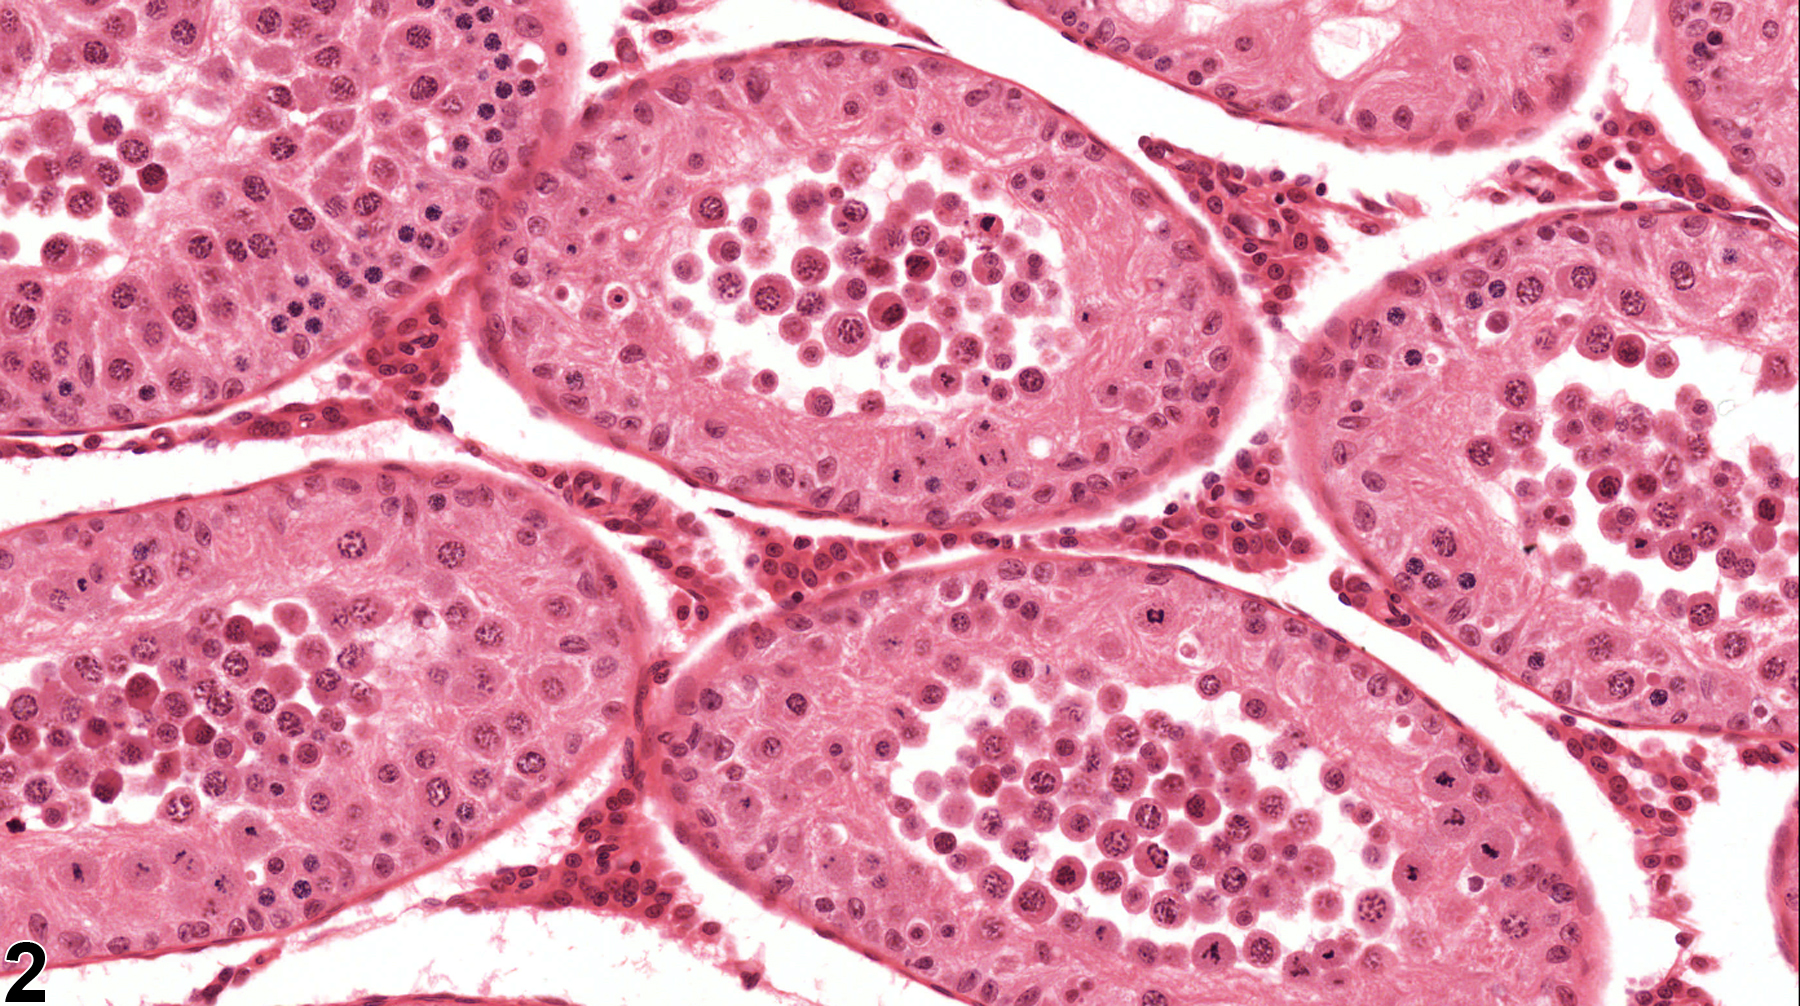 Image of germ cell exfoliation in the testis from a male Harlan Sprague-Dawley rat